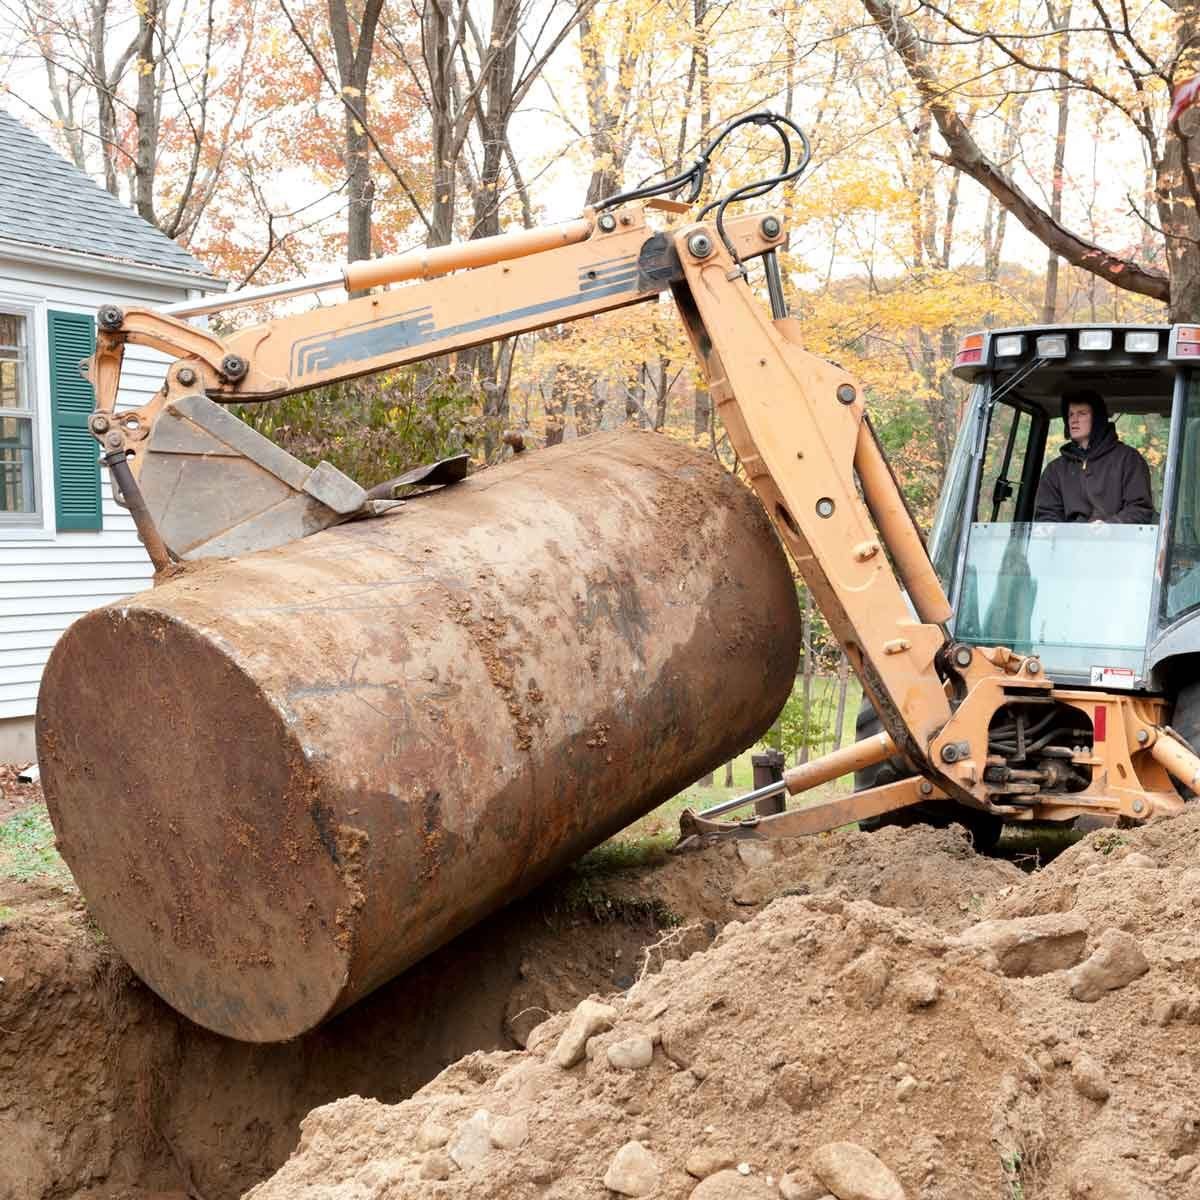 What You Need to Know About Underground Oil Tanks